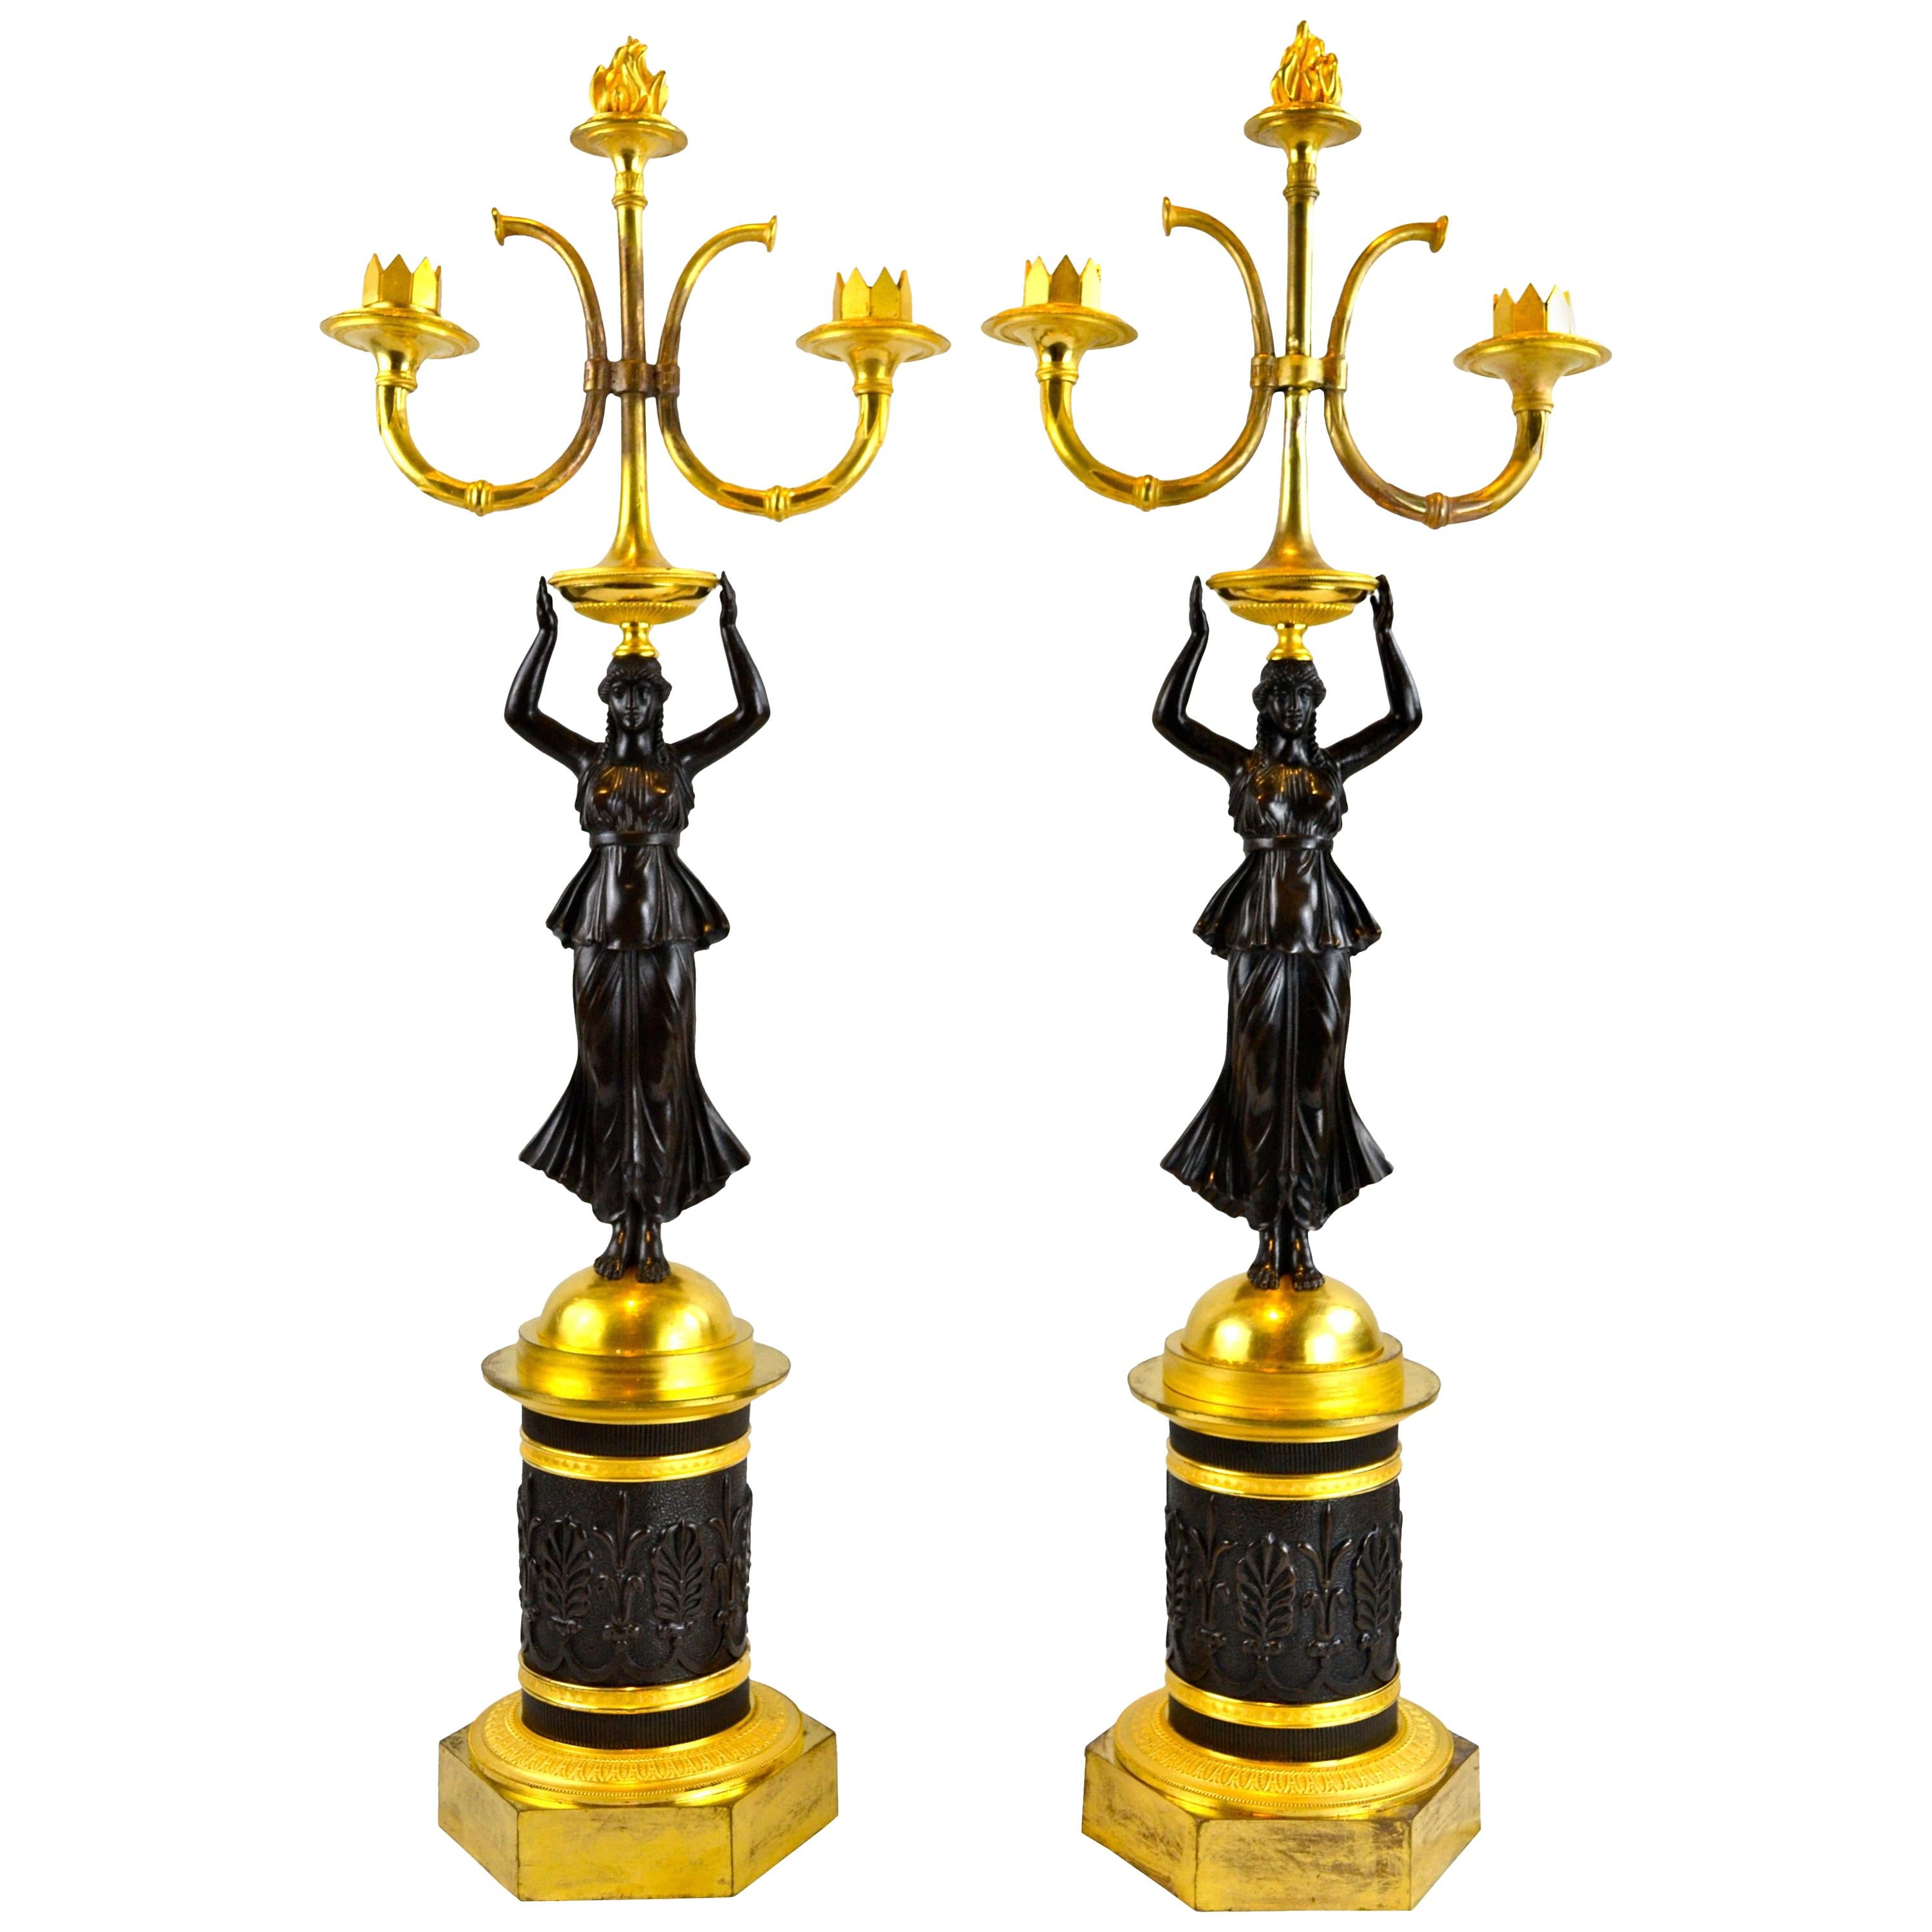 Pair of 19 Century Russian Empire Figural Gilt and Patinated  Bronze Candelabra